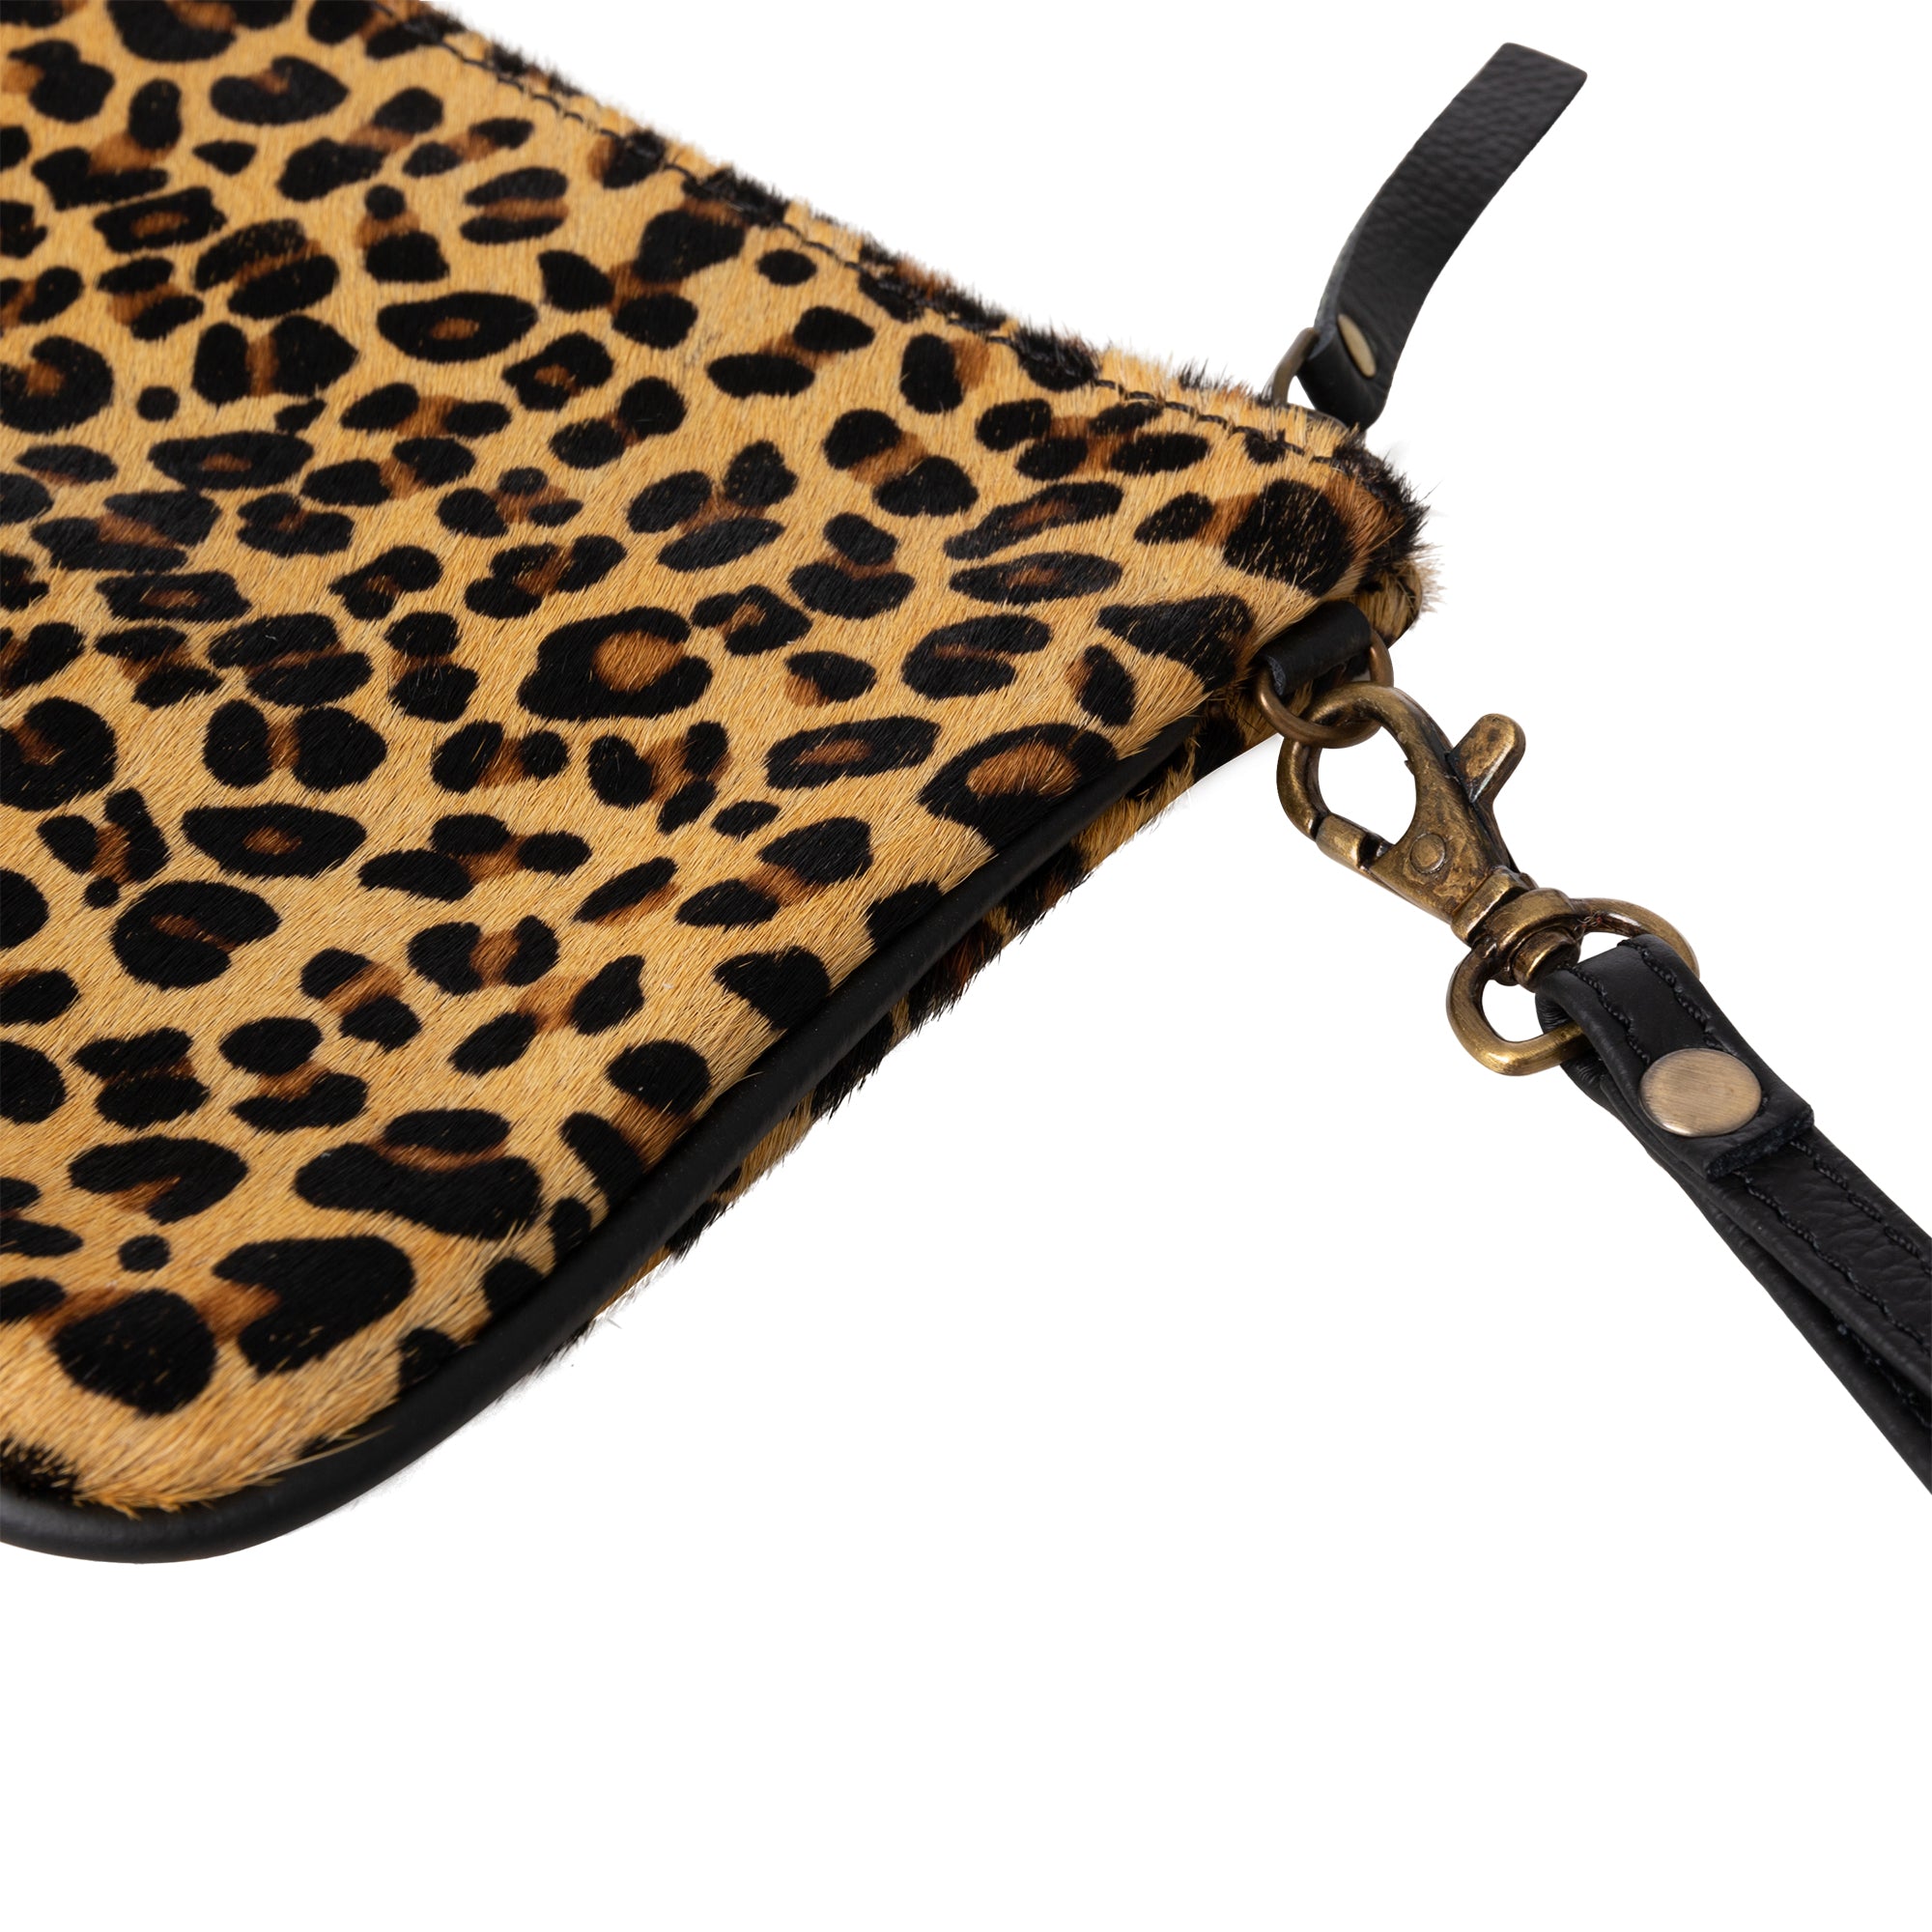 Buy Stylish Animal Tiger print Clutch purse collection PU-LEATHER Shining  And Glossy material Hand Wallet Slim ladies Women (BROWN) at Amazon.in